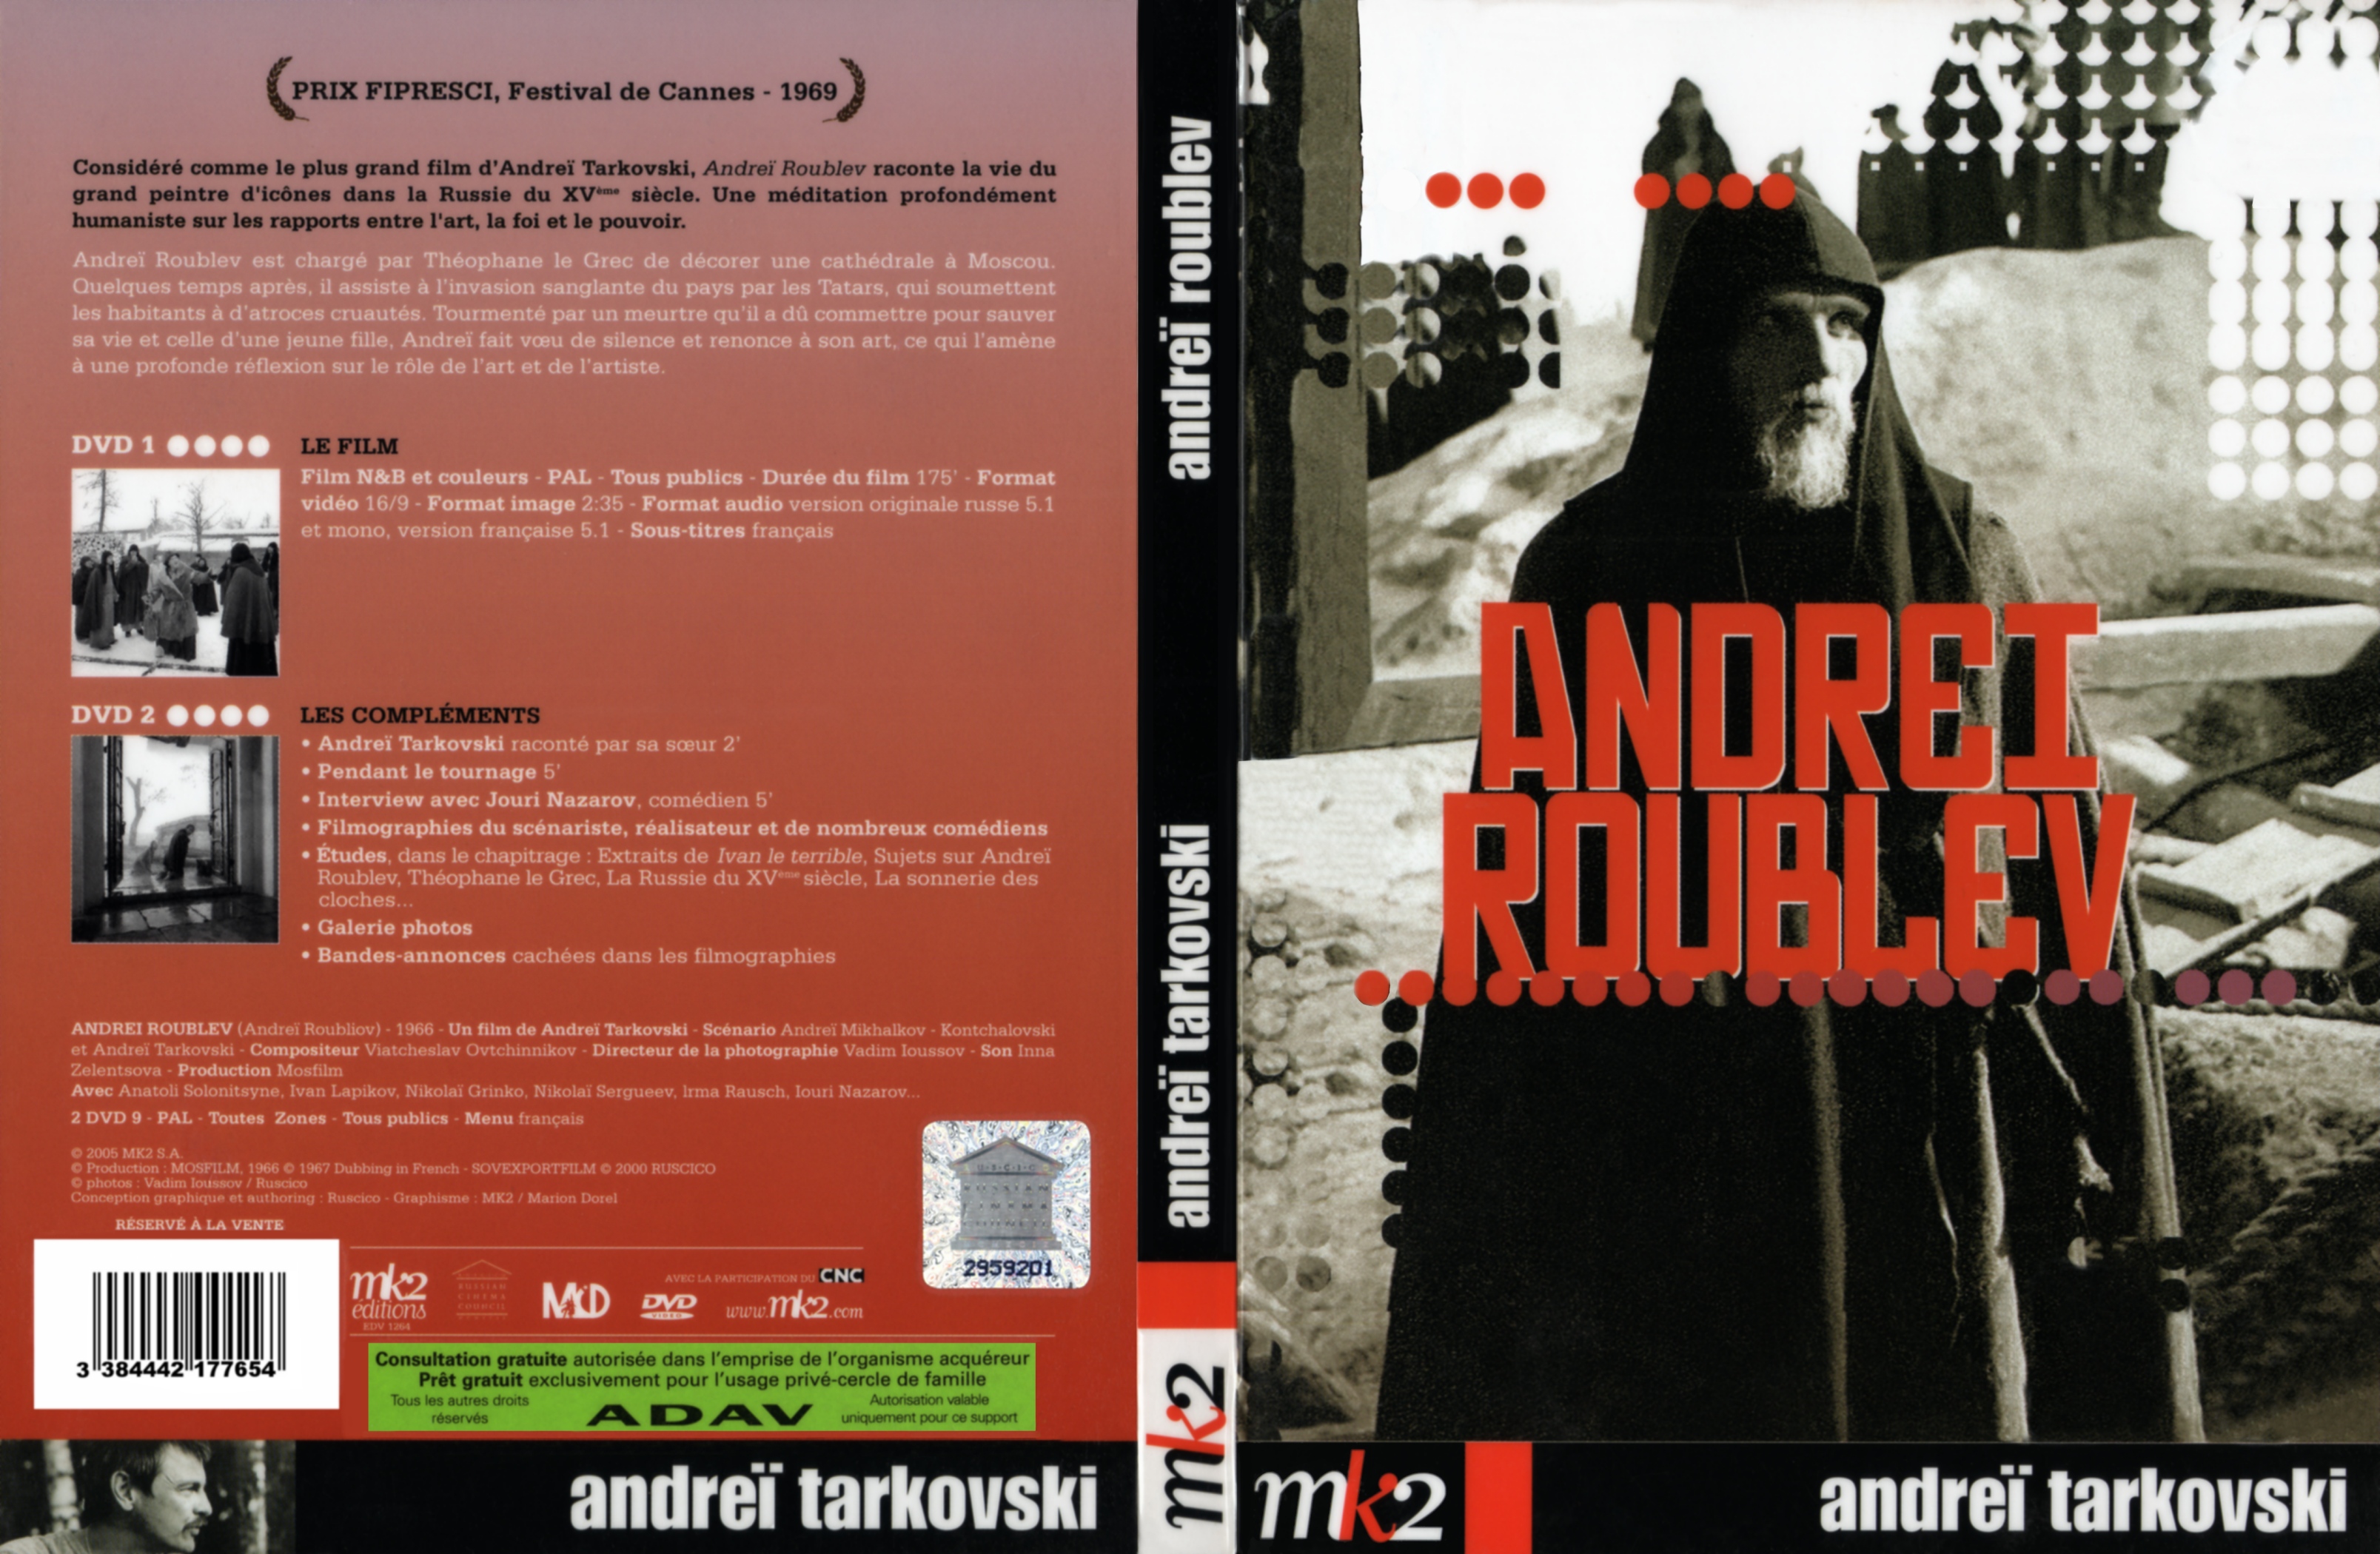 Jaquette DVD Andrei Roublev